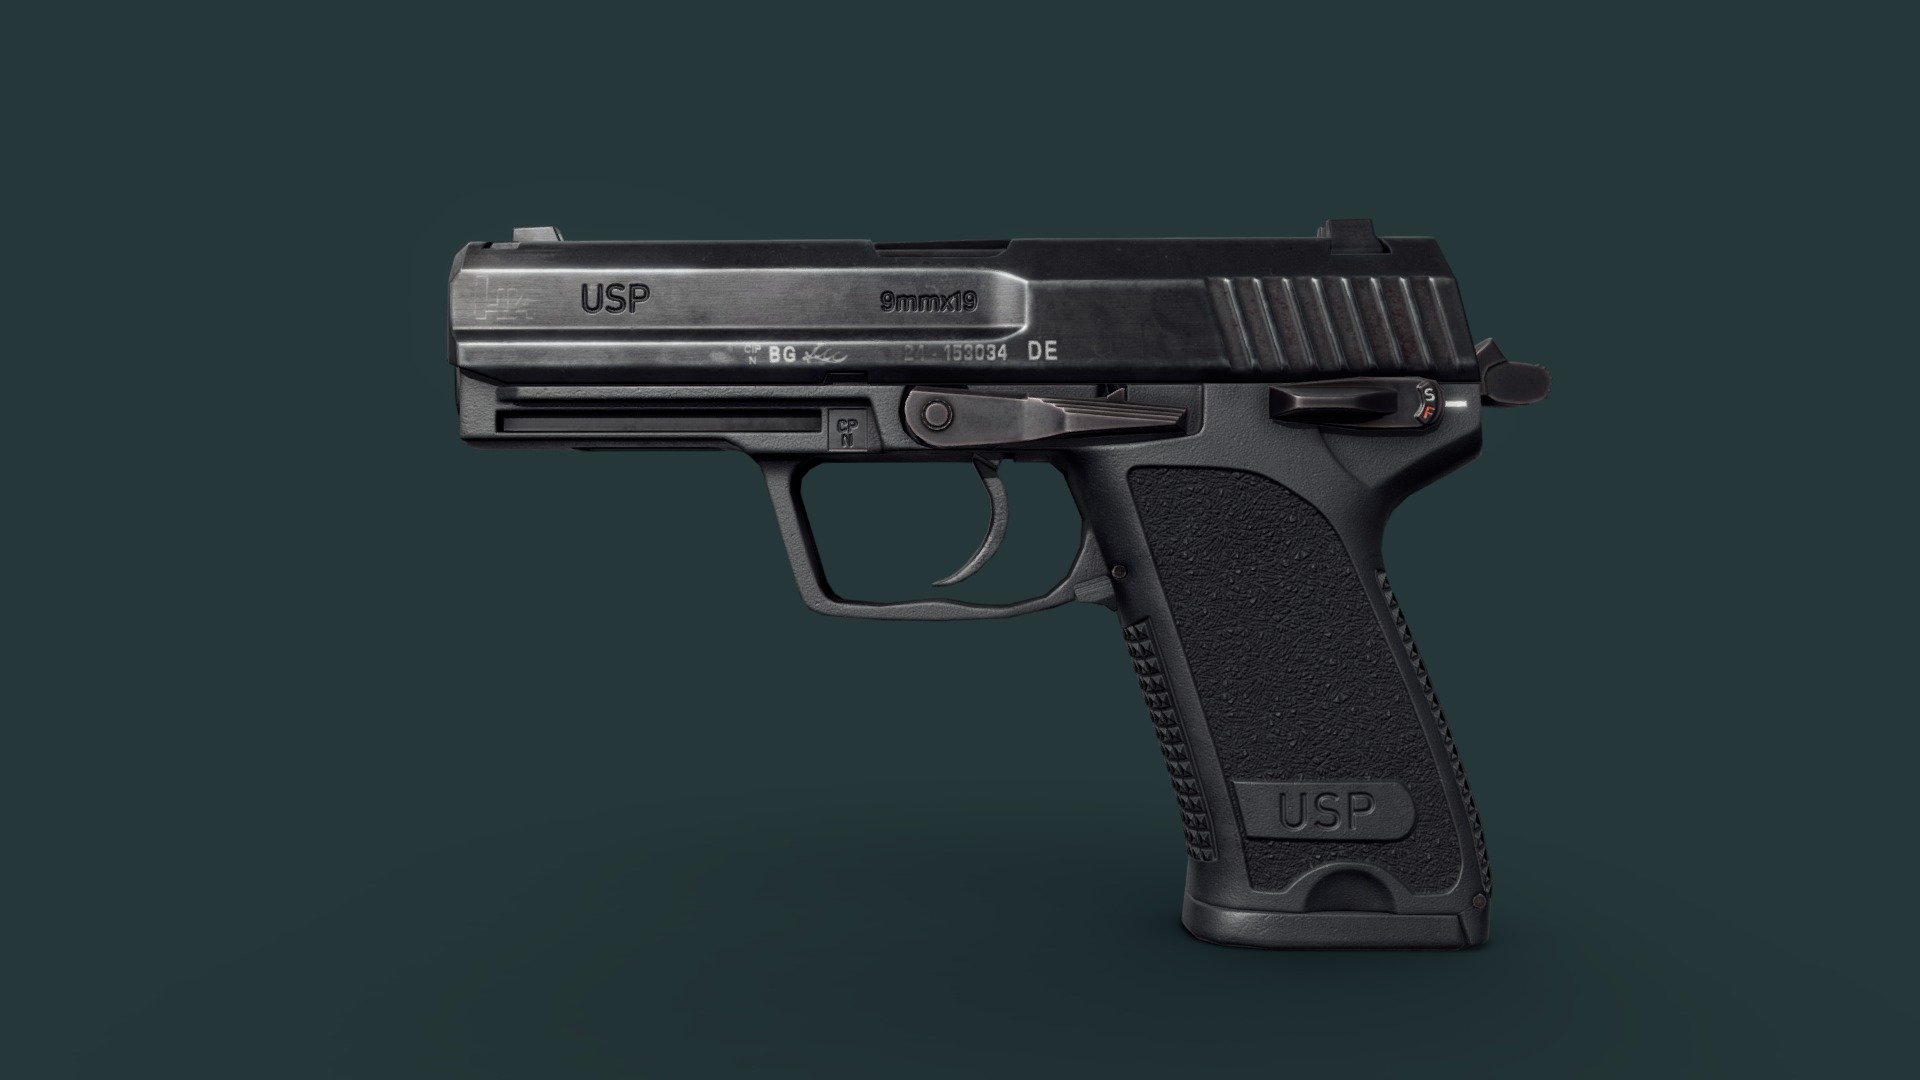 PRODUCT DESCRIPTION

USP 9mmx19-3d model ready for Virtual Reality (VR), Augmented Reality (AR), games and other real-time apps. Textures made for PBR shader system.

Total triangles 10.2k

Total vertices 5.1k

Model has been made using: no Ngons,no overlapping polygonsno overlapping vertex

Included Map Types:

Main material - 2 x 4k

Albedo (PNG) Metalness (PNG) Roughness (PNG) Normalmap (PNG) AO (PNG)

Format file:

-*.Fbx

Model uses PBR textures. The intended use for these models and its textures are first person shooters. You can downscale the textures from 4K to 2K or 1K depending on your needs but you'll get the highest resolution to decide for yourself. Rig, animations or sound are not included 3d model